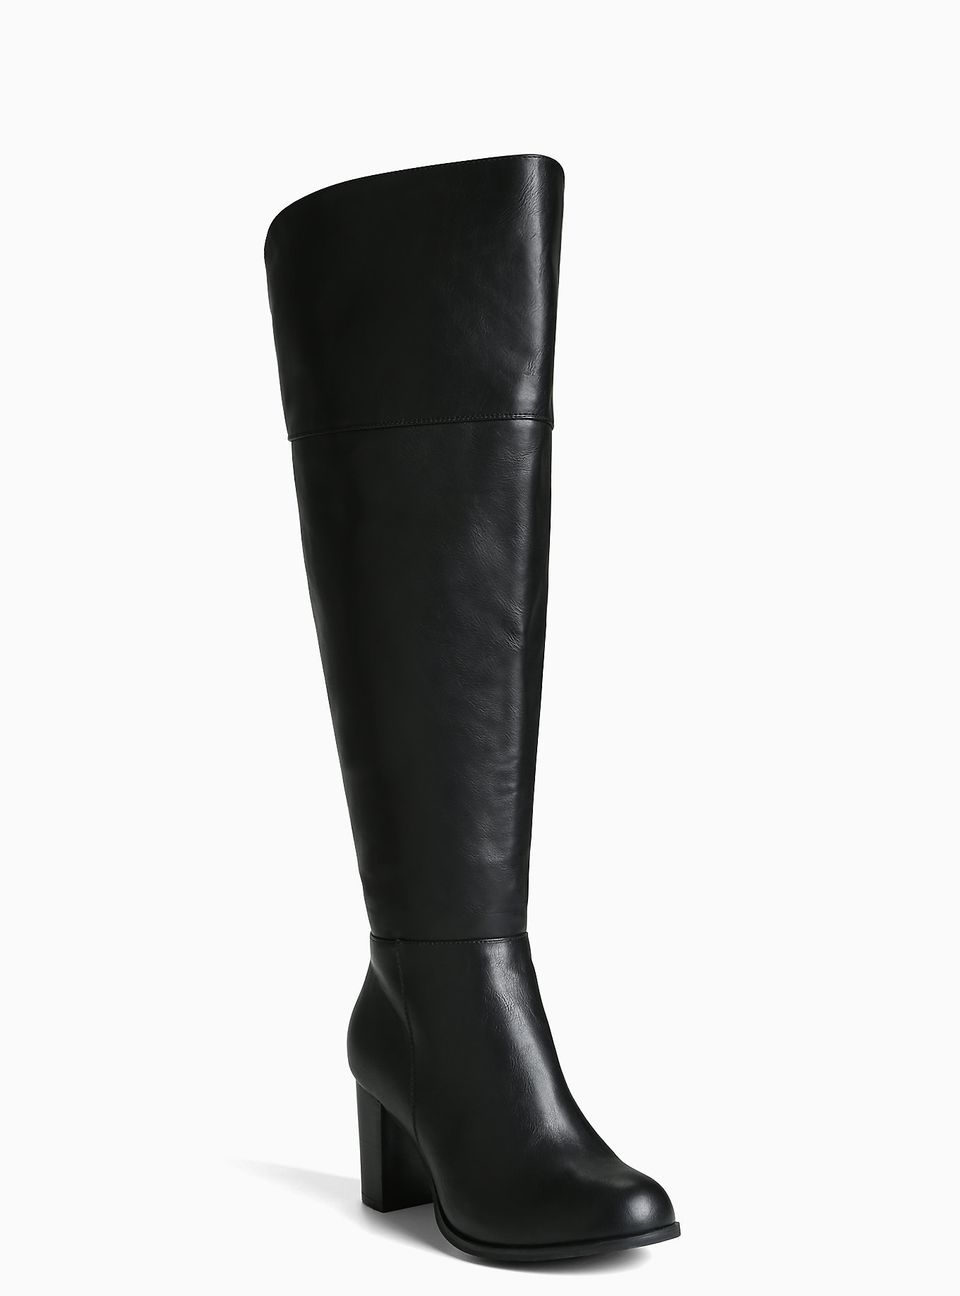 Over-The-Knee Boots That'll Actually Fit Women With Big Calves ...